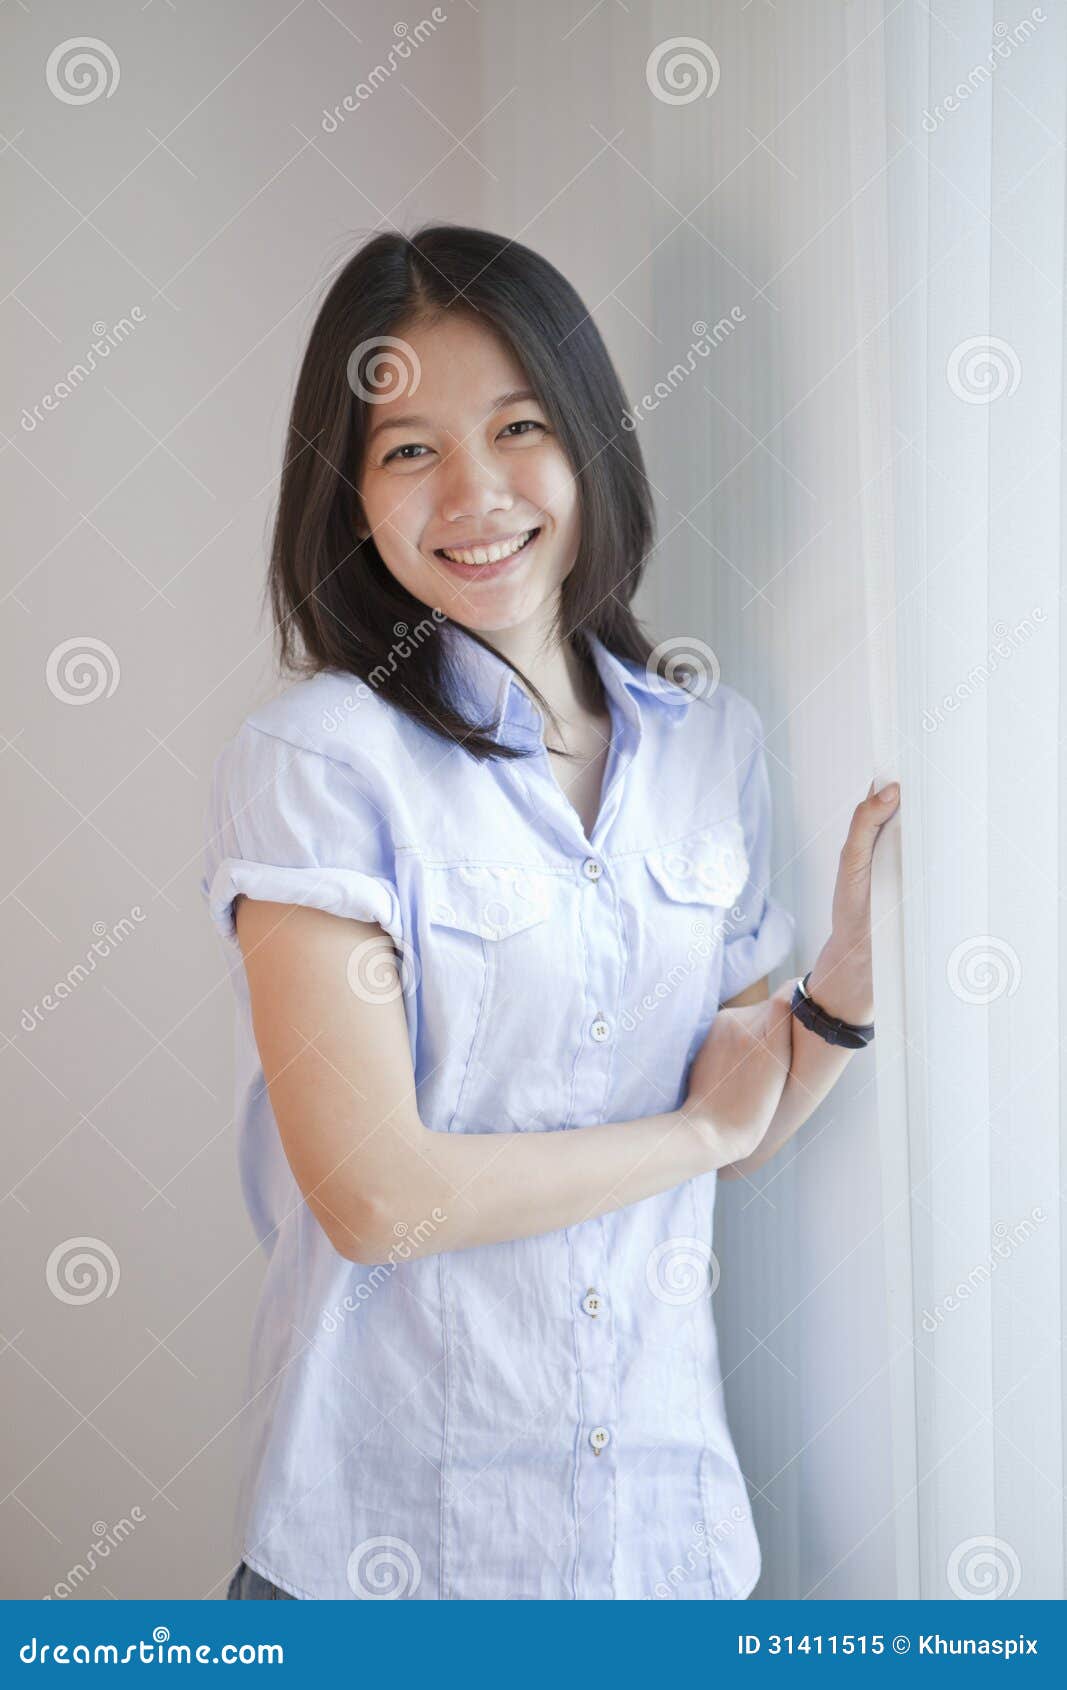 Natural Face With No Make Up Of Asian Teen Stock Image ...